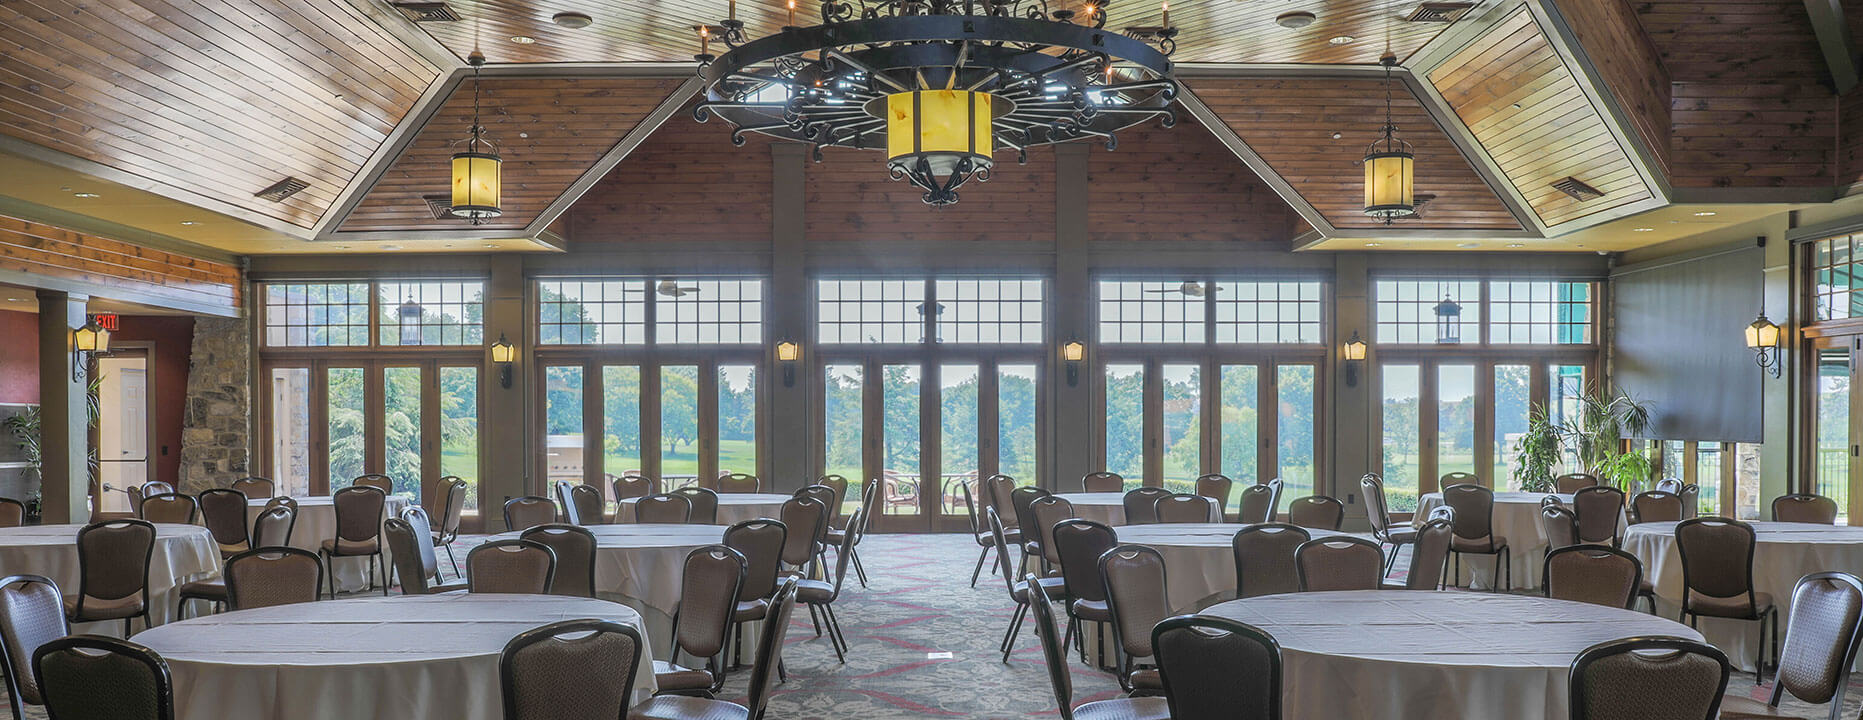 Picard Grand Pavilion at Hershey Country Club